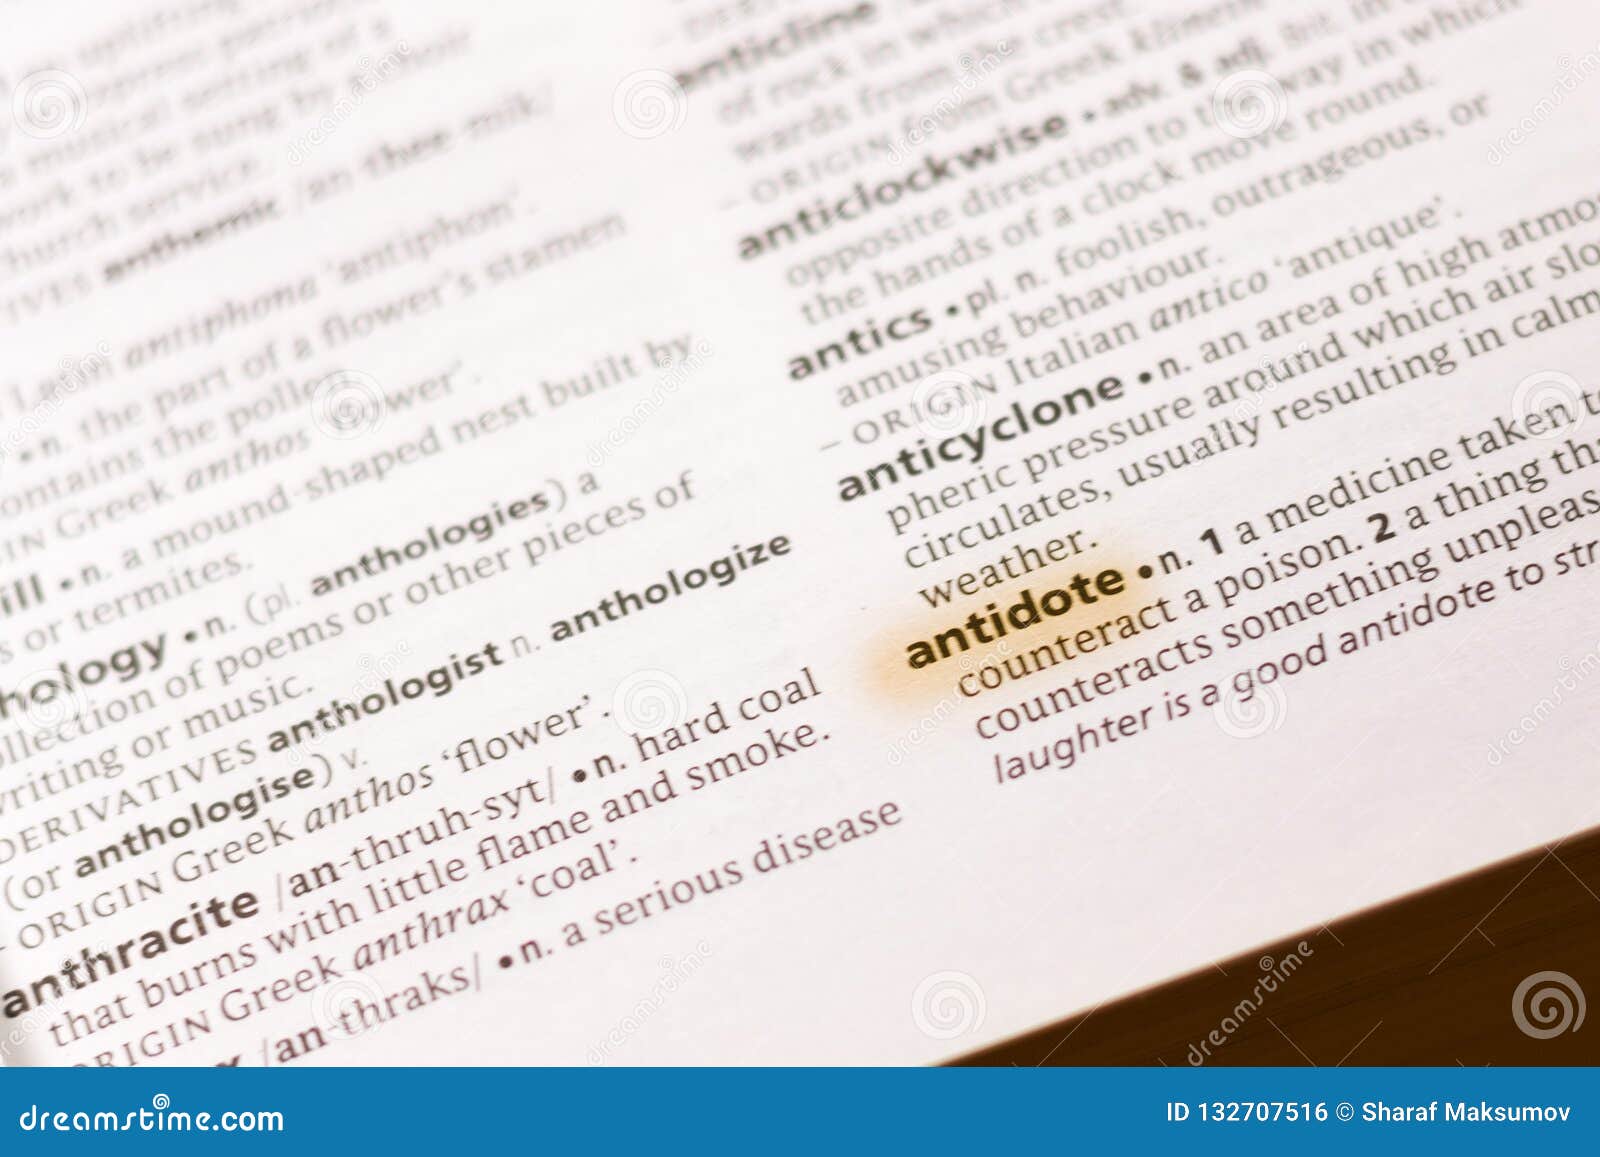 antidote definition